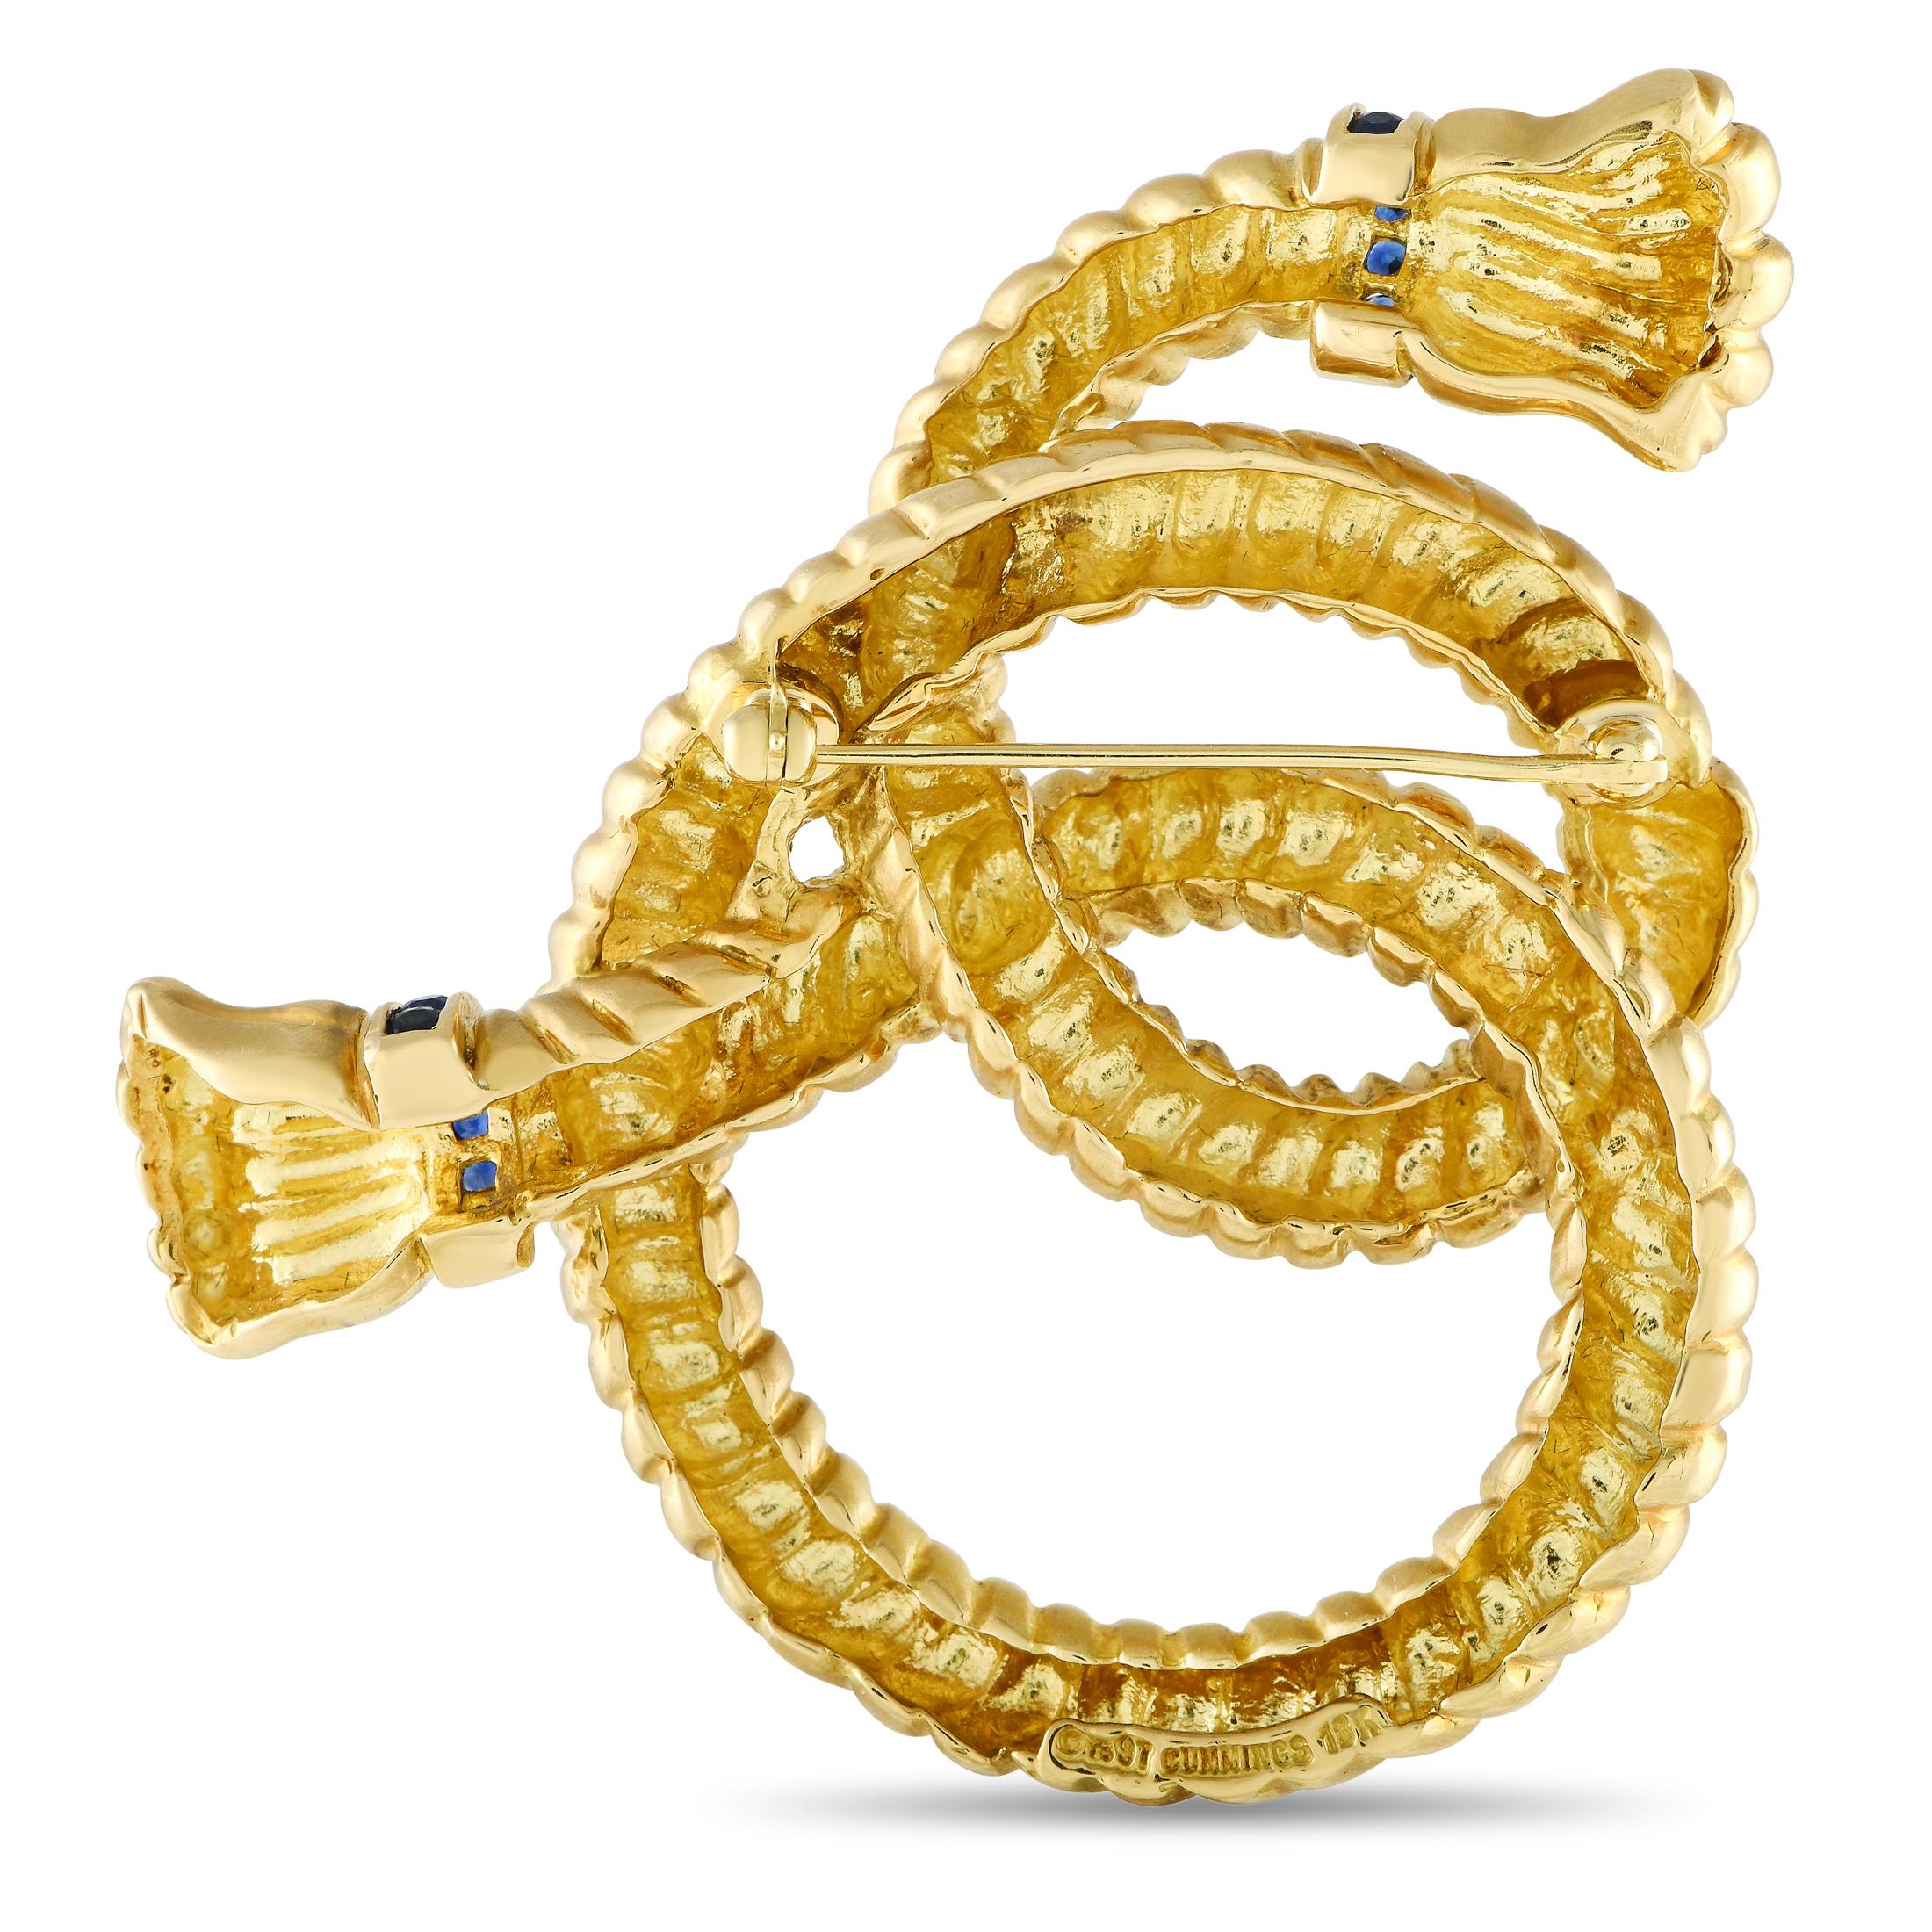 This artistic vintage Angela Cummings brooch will add a touch of luxury to any ensemble. Designed to resemble a knotted rope, this breathtaking accessory is crafted from opulent 18K Yellow Gold and includes subtle sapphire accents at each end. It